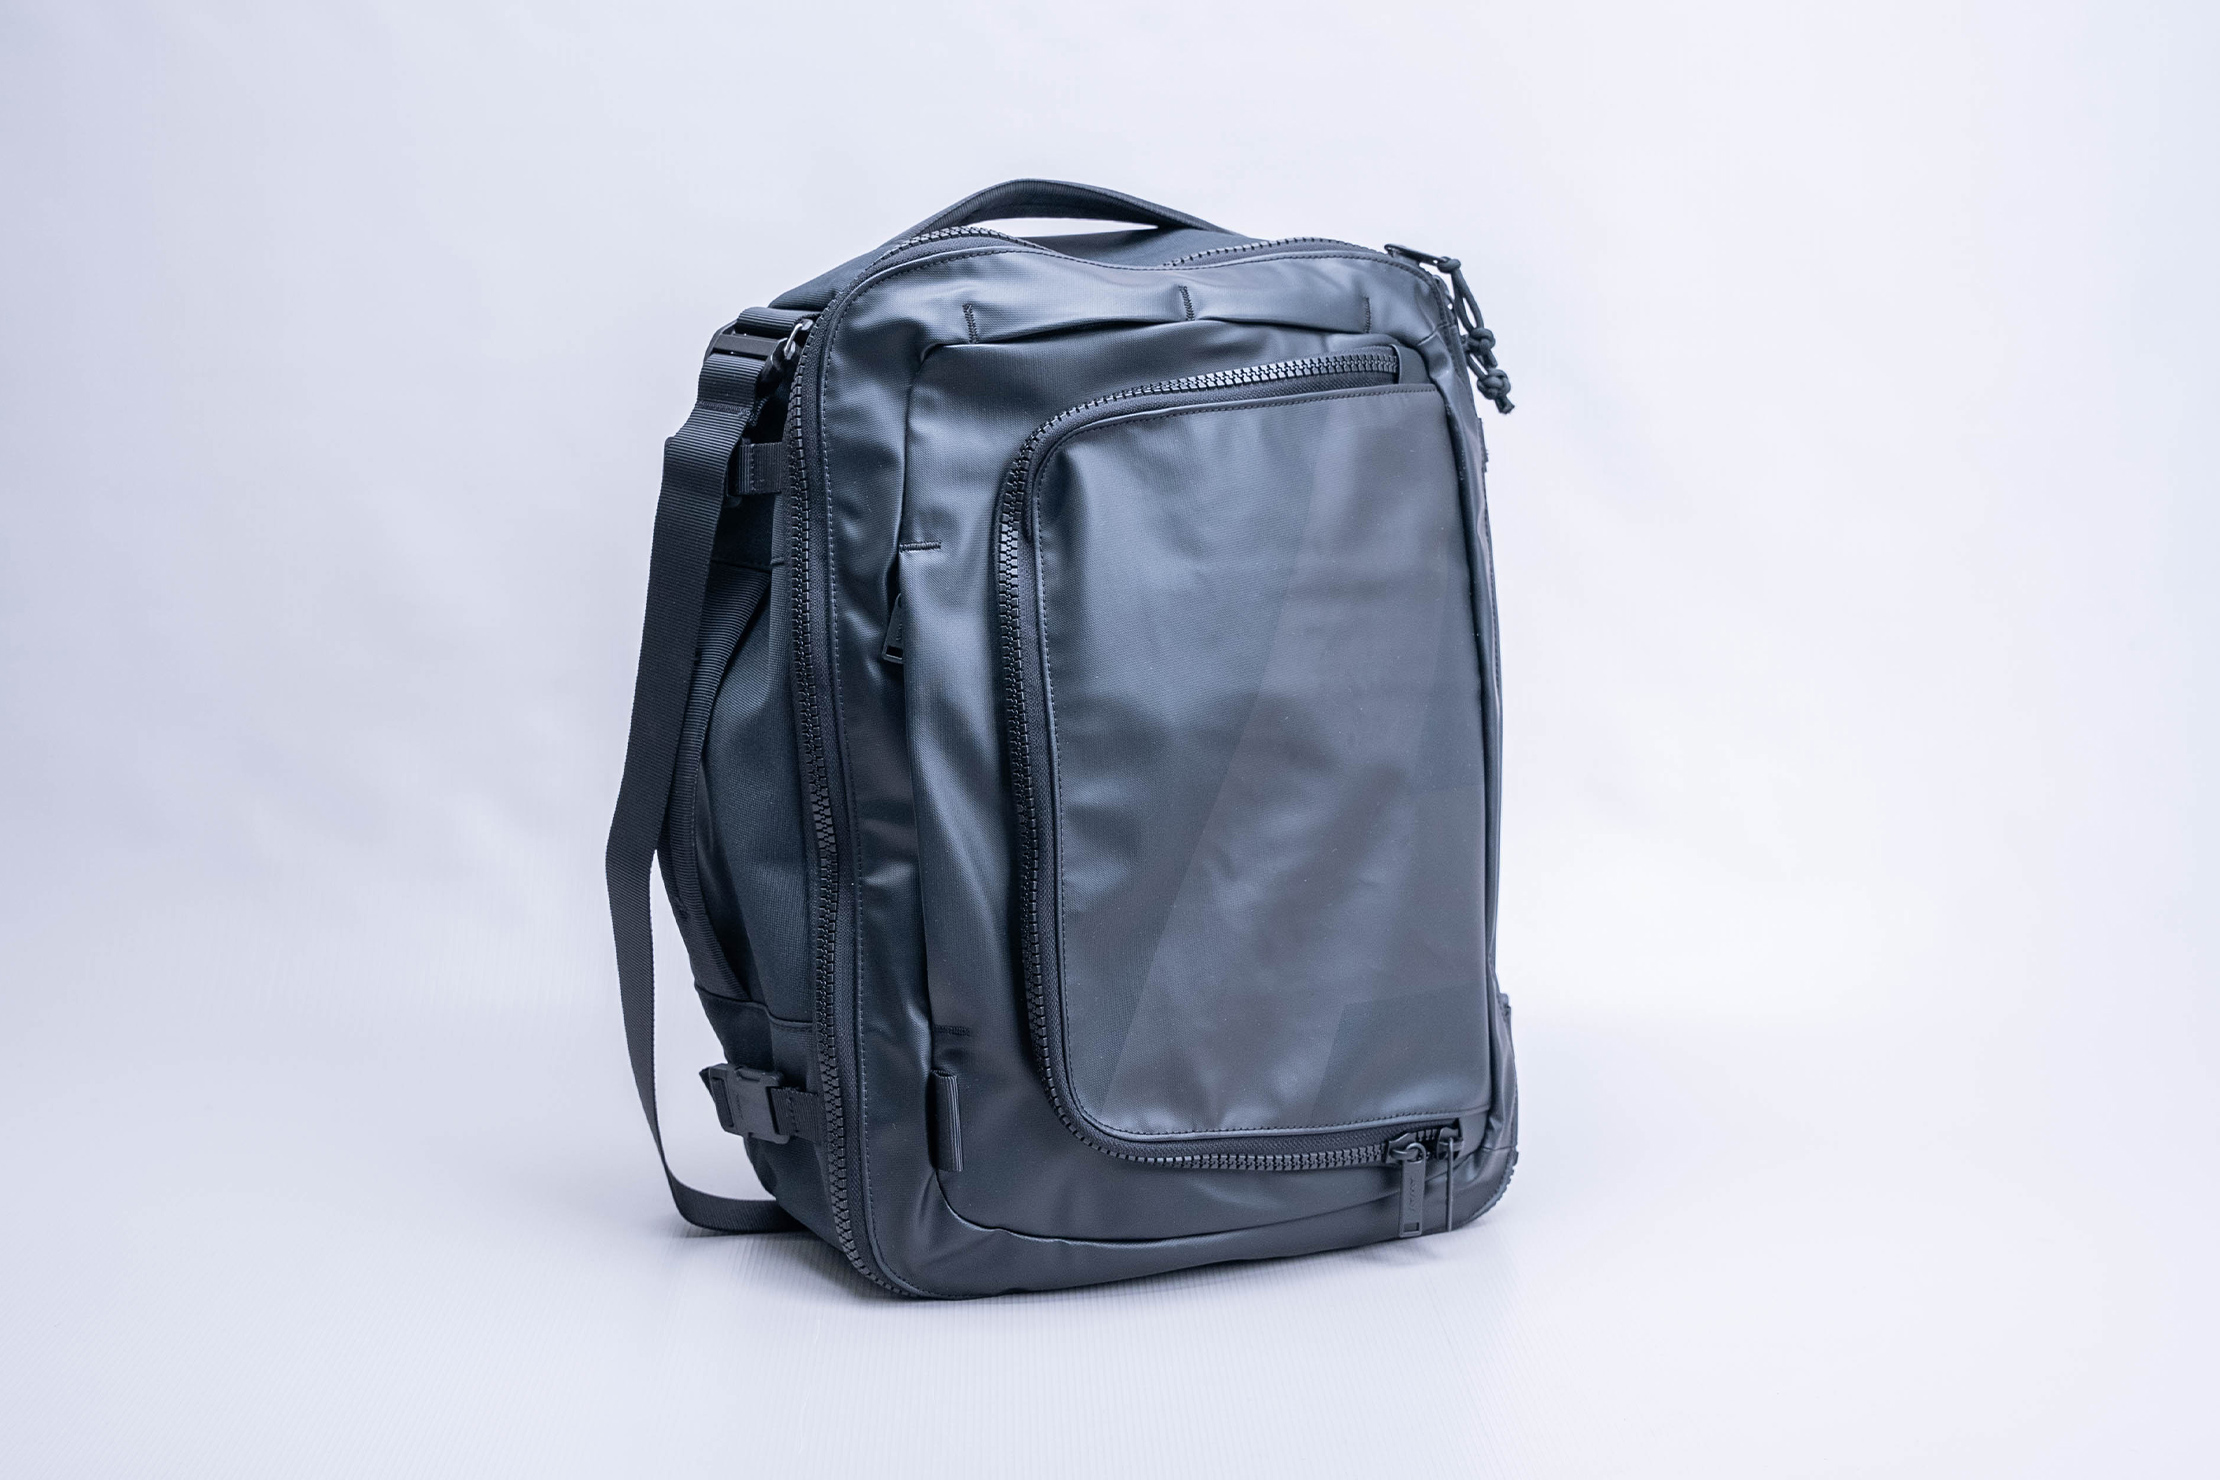 F.A.R Convertible Backpack 45L